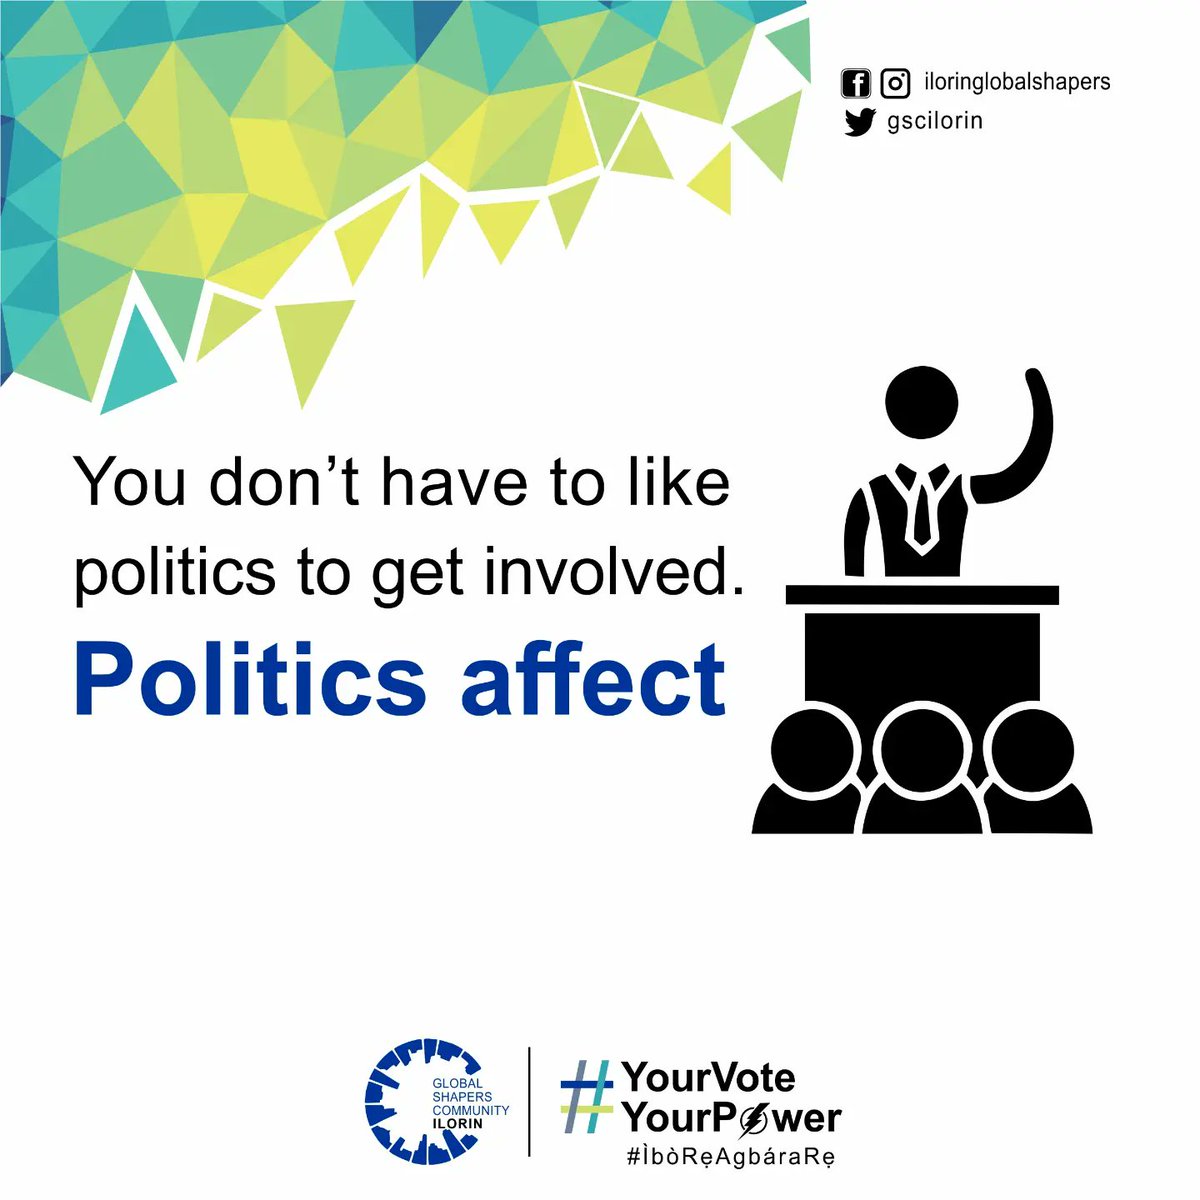 Politics affect all sectors. Take part by voting on Election Day this Saturday, 18th March.

#FixPolitics #2023Elections #StateElections #gubenatorialelections